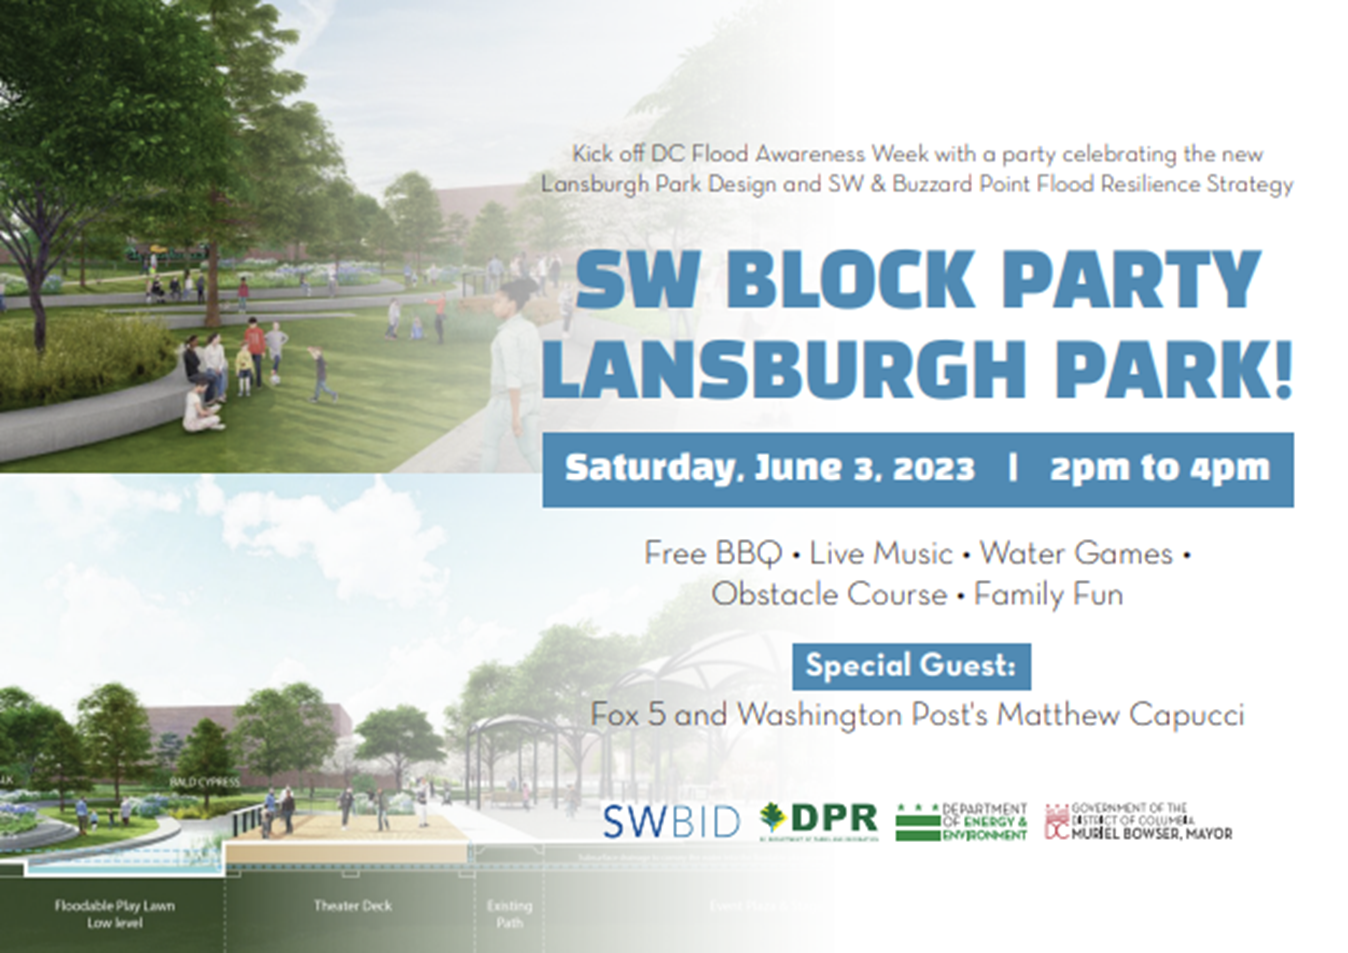 Kick off DC Flood Awareness Week with a party celebrating the new Lansburgh Park Design and SW  & Point Flood Resilense Strategy  SW Block Party Lansburgh Park Saturday, June 3, 2023 - 2pm to 4pm Free BBQ - Live Music - Water Games - Obstacle Course - Family Fun Special Guest: Fox 5 and Washington Post's Matthew Capucci